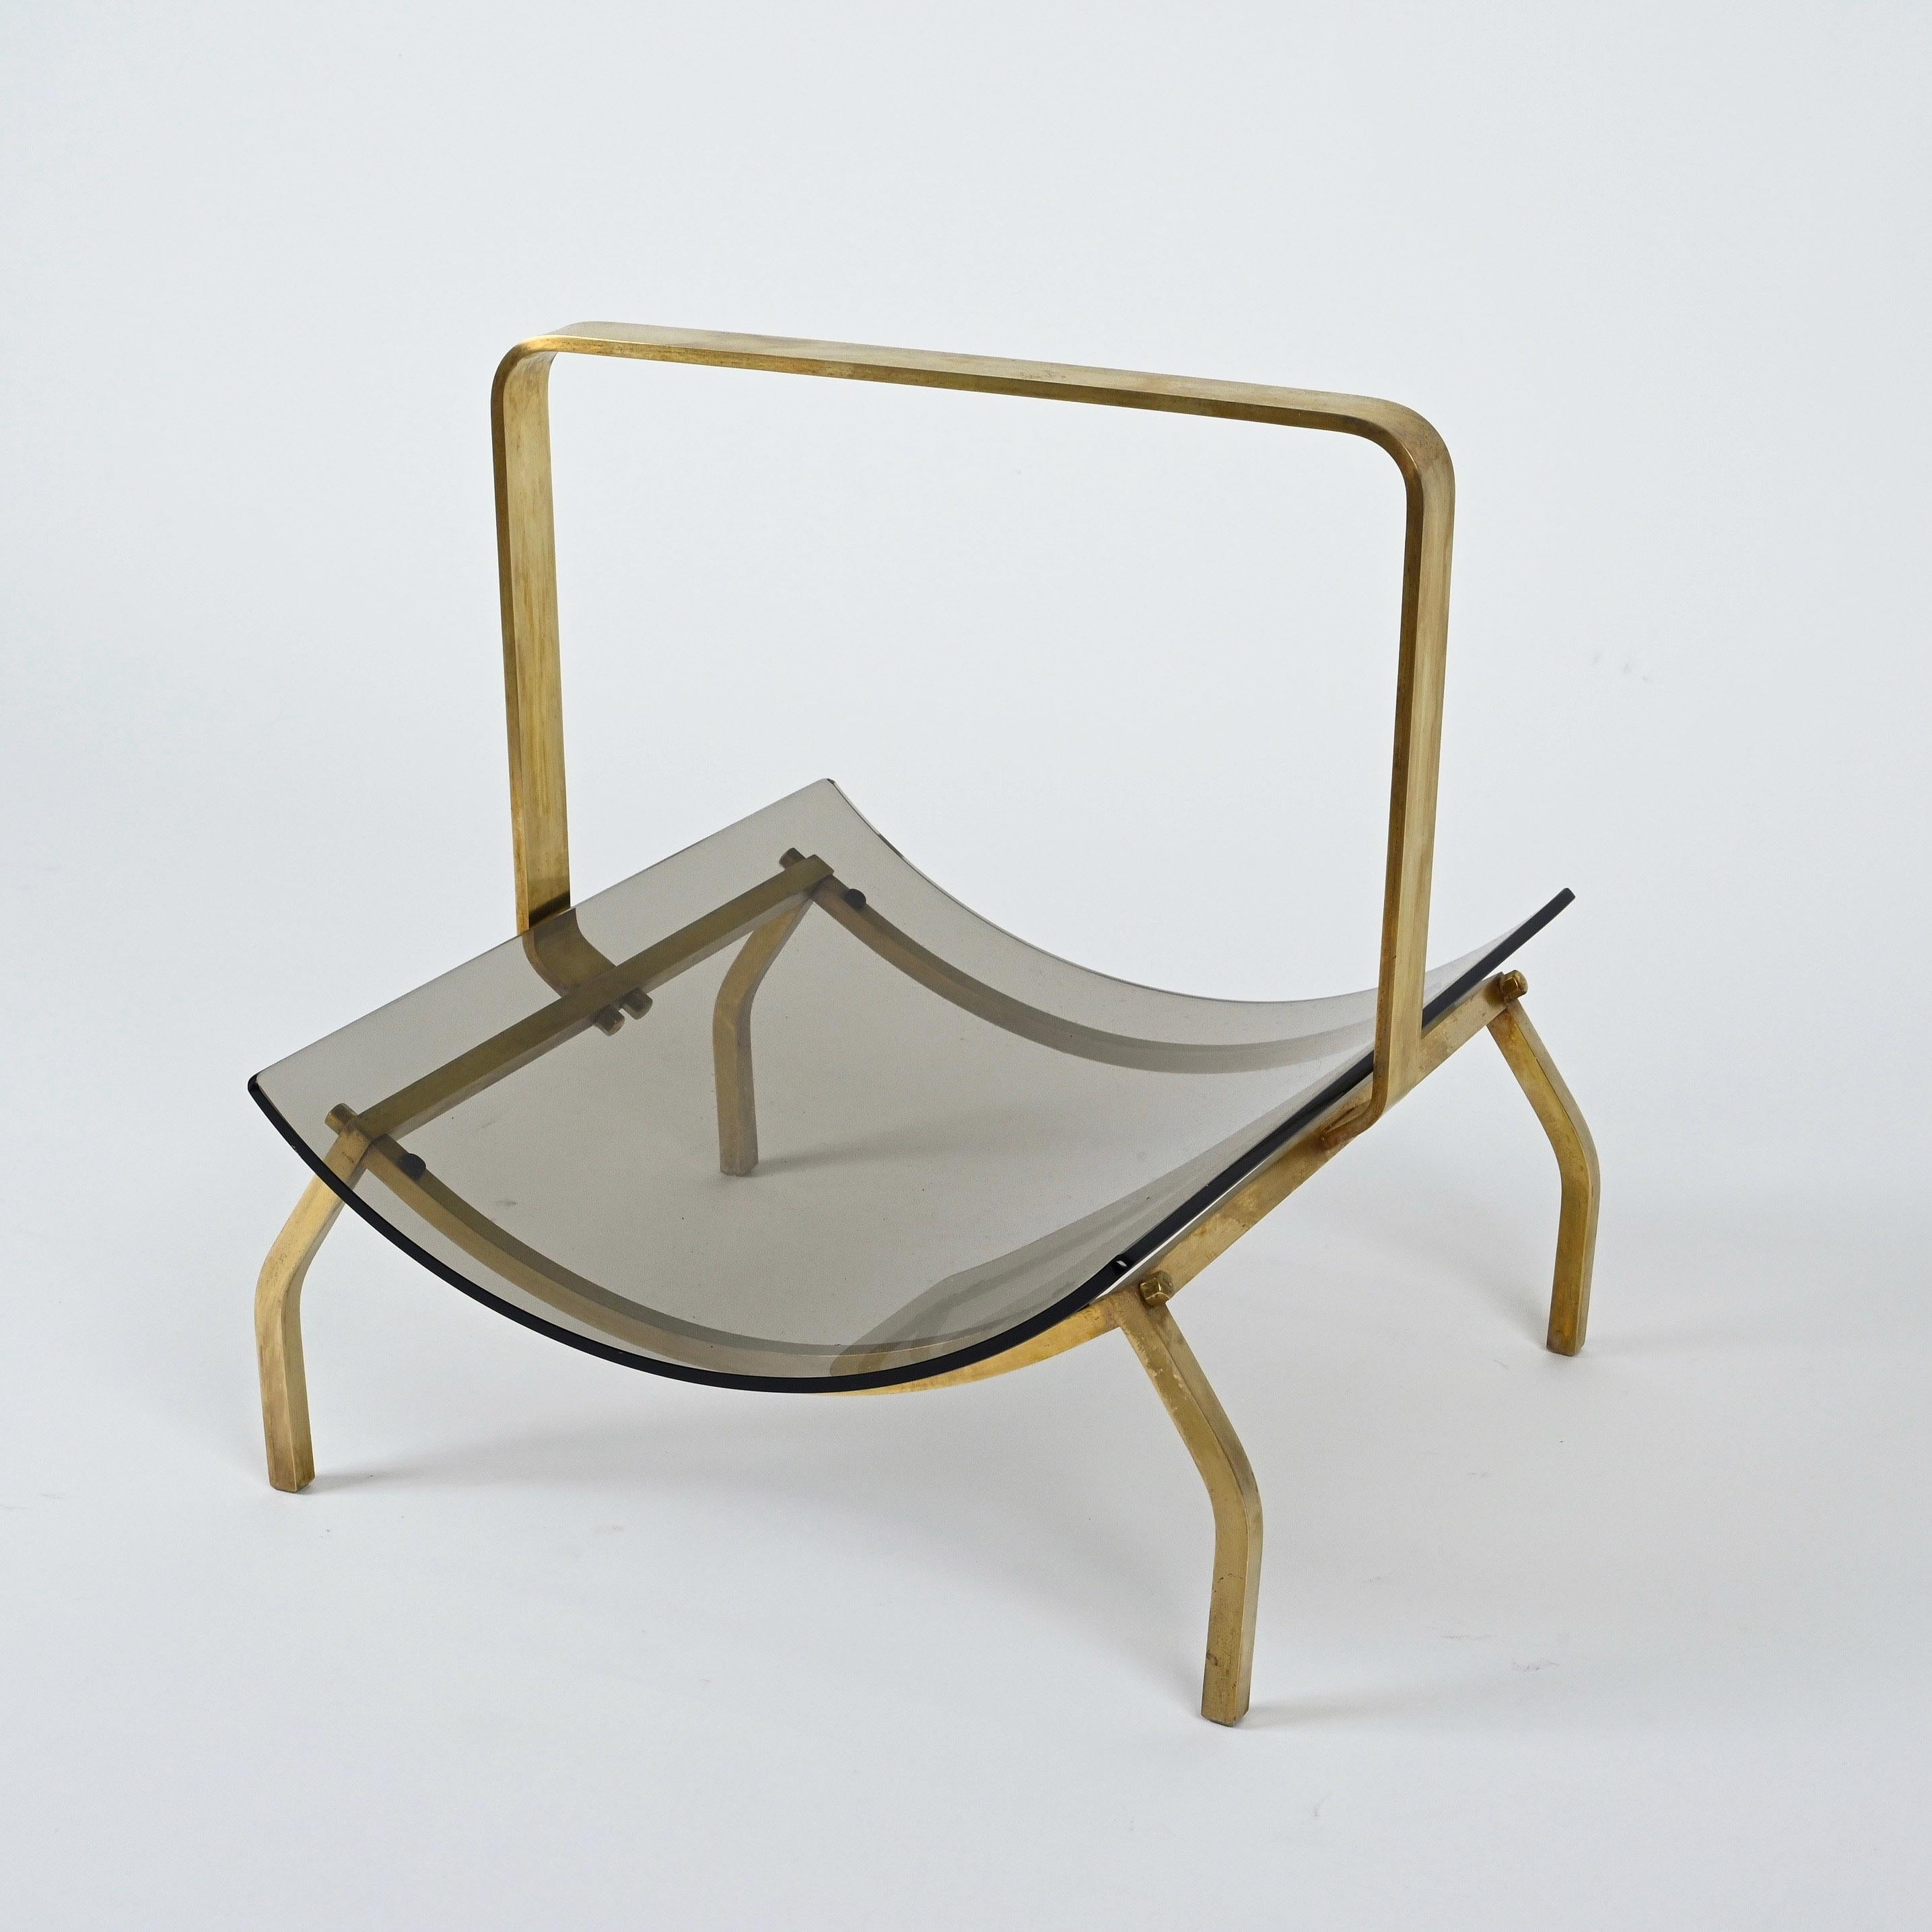 Midcentury Fontana Arte Brass and Smoked Glass Magazine Rack Stand, 1960s, Italy For Sale 9